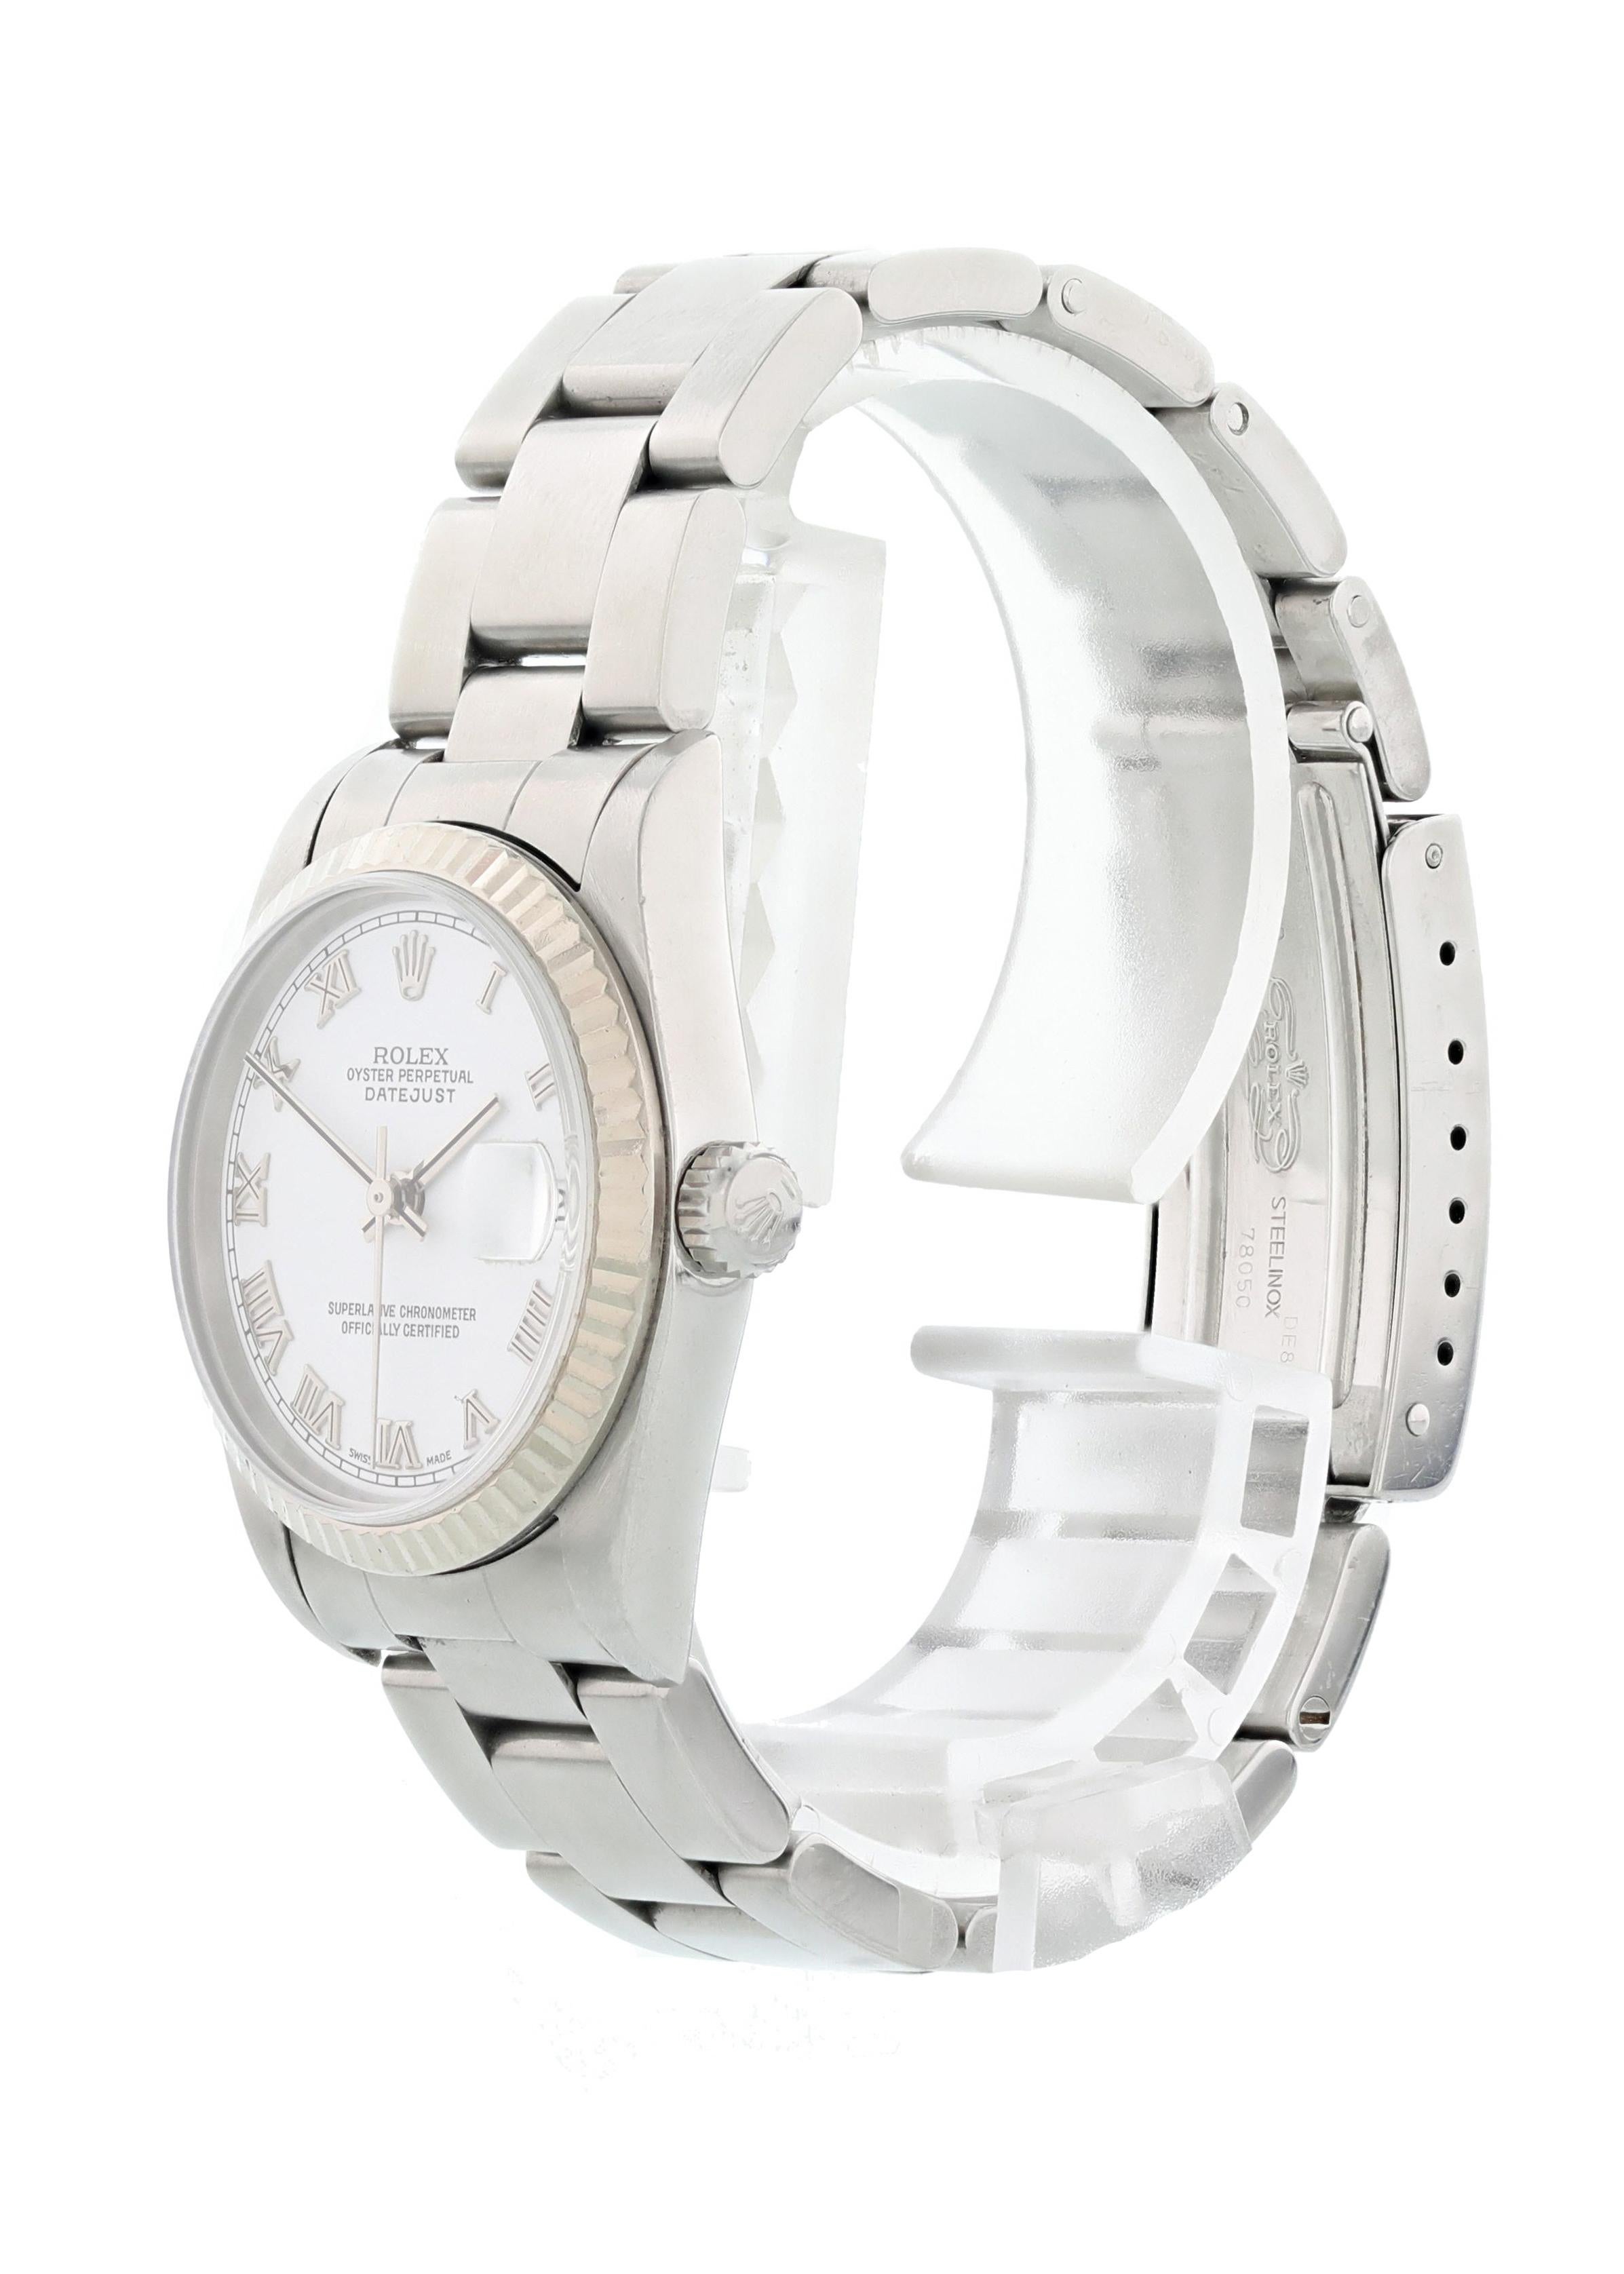 Rolex Oyster Perpetual Datejust 78274 Ladies Watch.  26mm Stainless steel case. 18K white gold fluted bezel. White dial with steel hands and Roman numeral markers. Quickset date display at the 3 o'clock position. Stainless steel jubilee bracelet